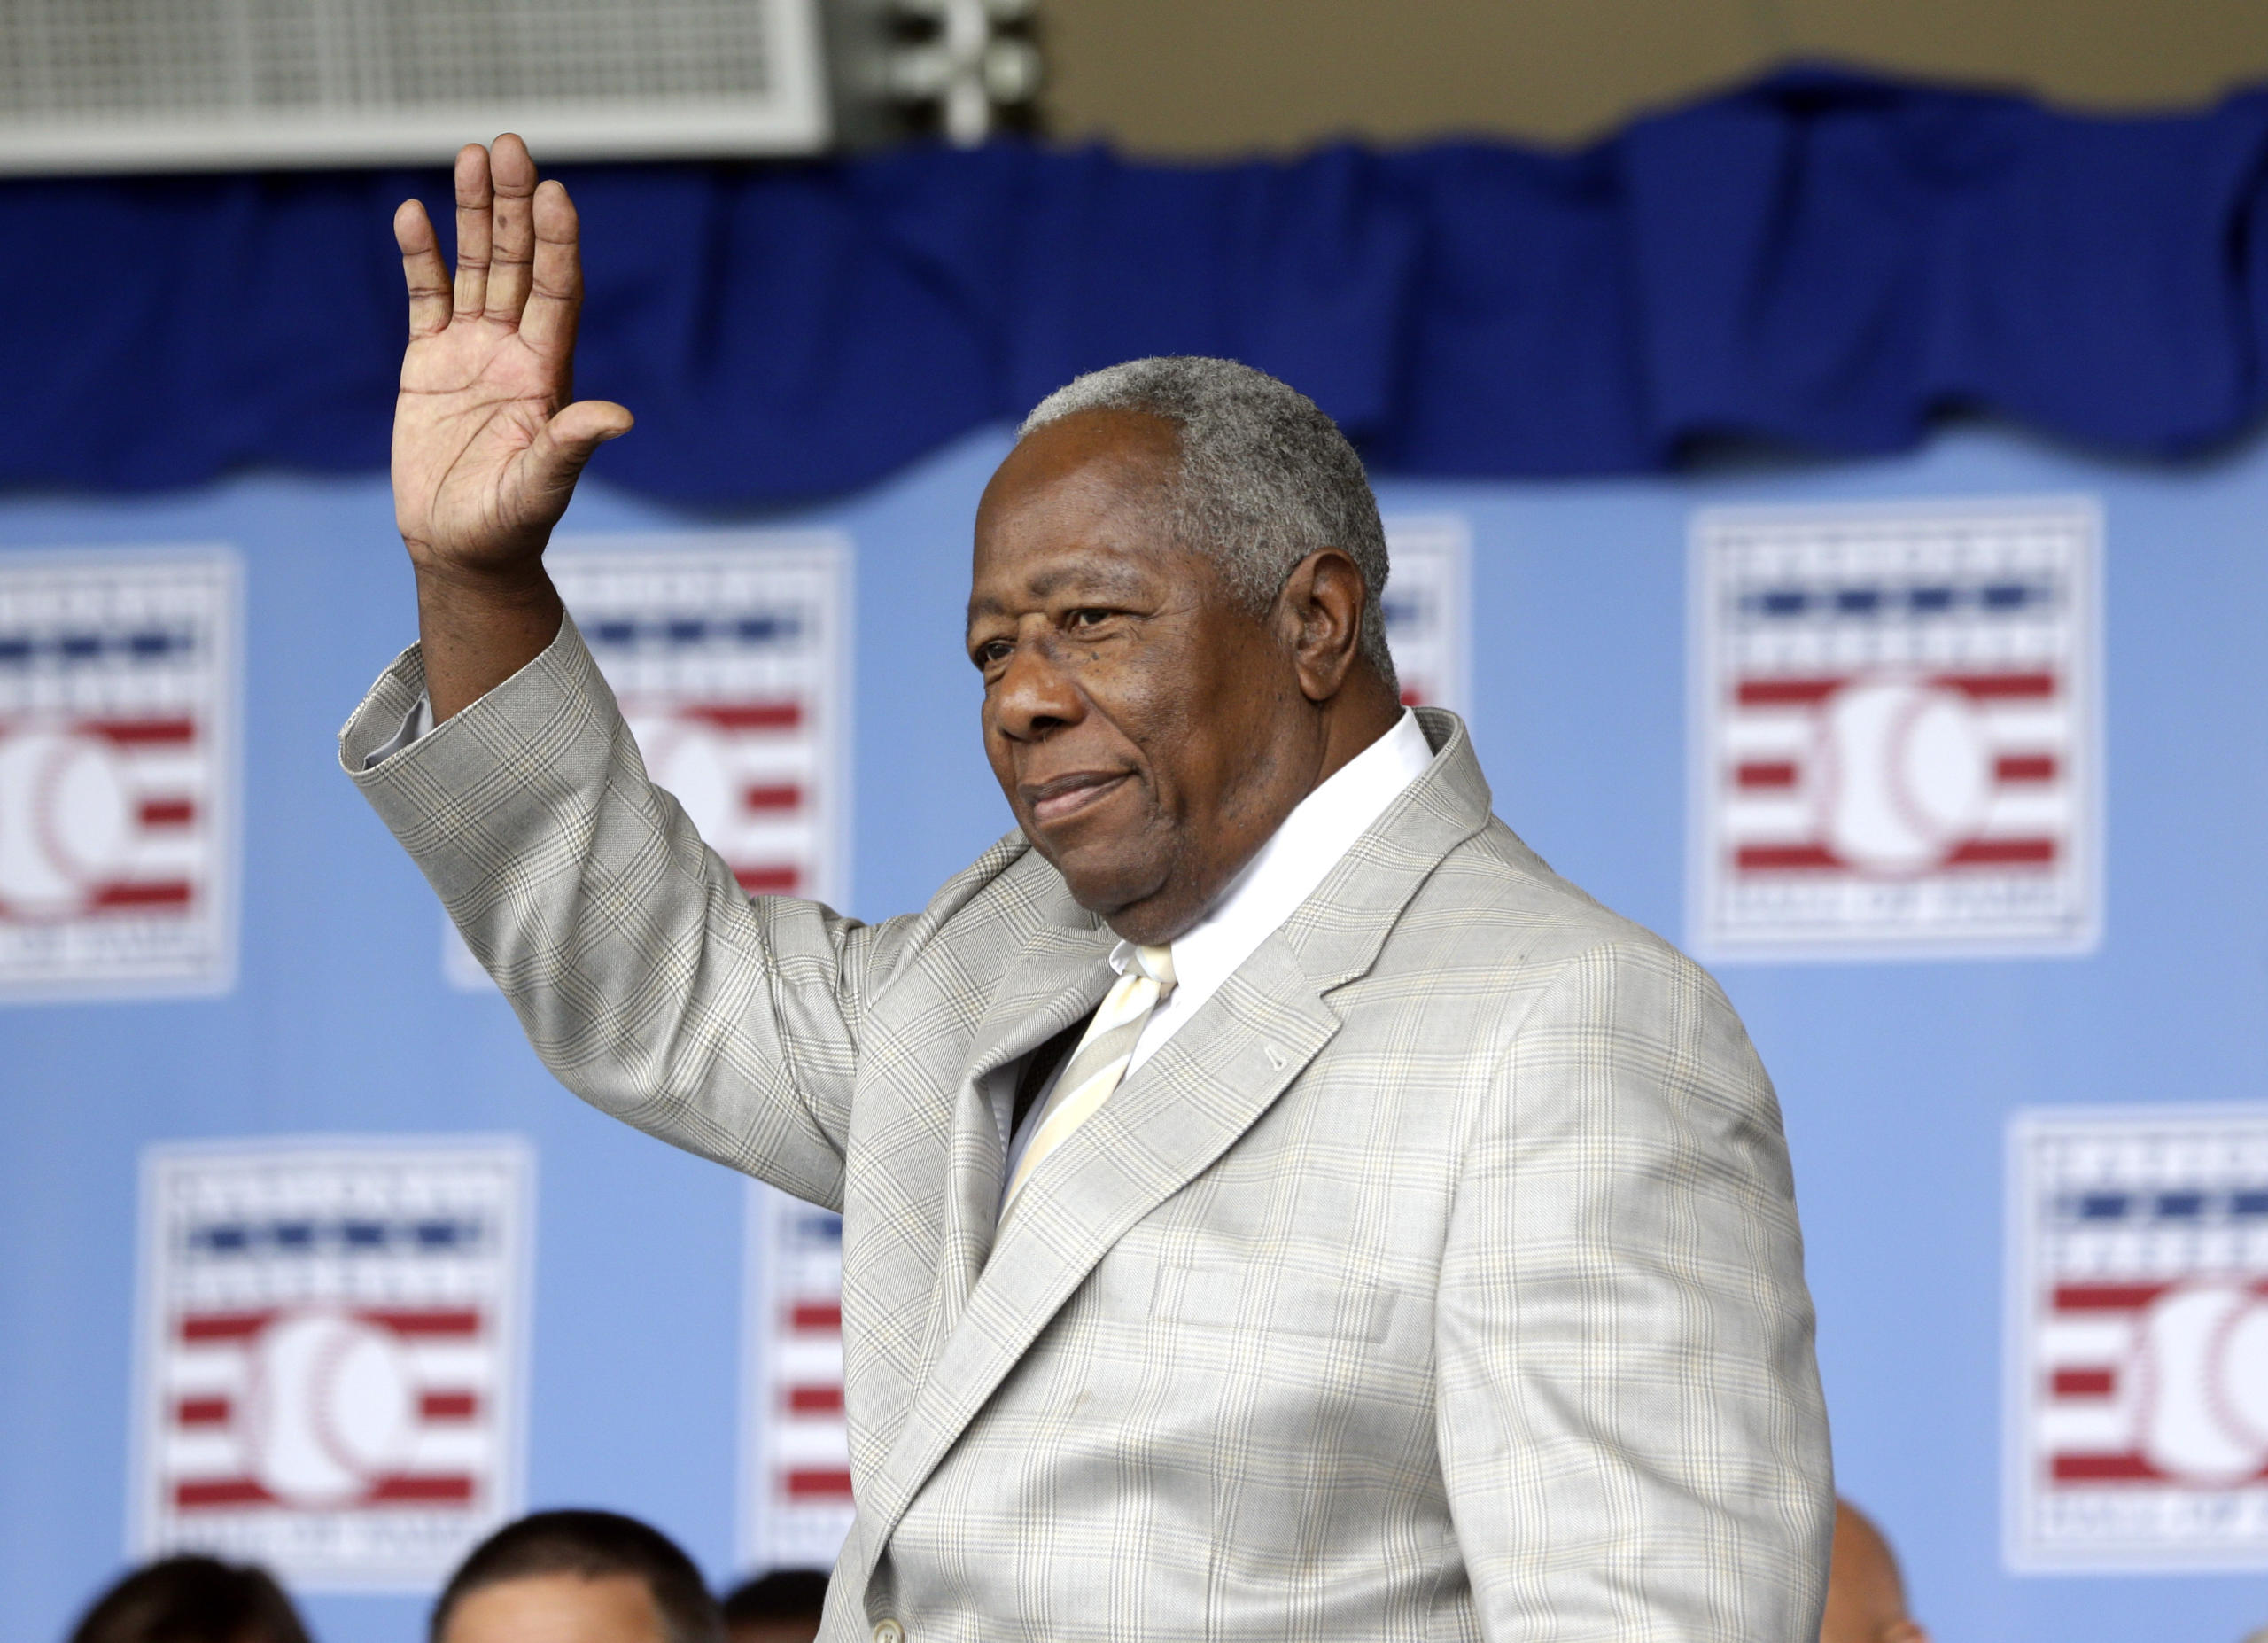 Hall of Famer Hank Aaron at the 2013 Baseball Hall of Fame induction ceremonies in Cooperstown, N.Y. Aaron died early Friday, Jan. 22, 2021. He was 86. The Atlanta Braves said Aaron died peacefully in his sleep. No cause of death was given.